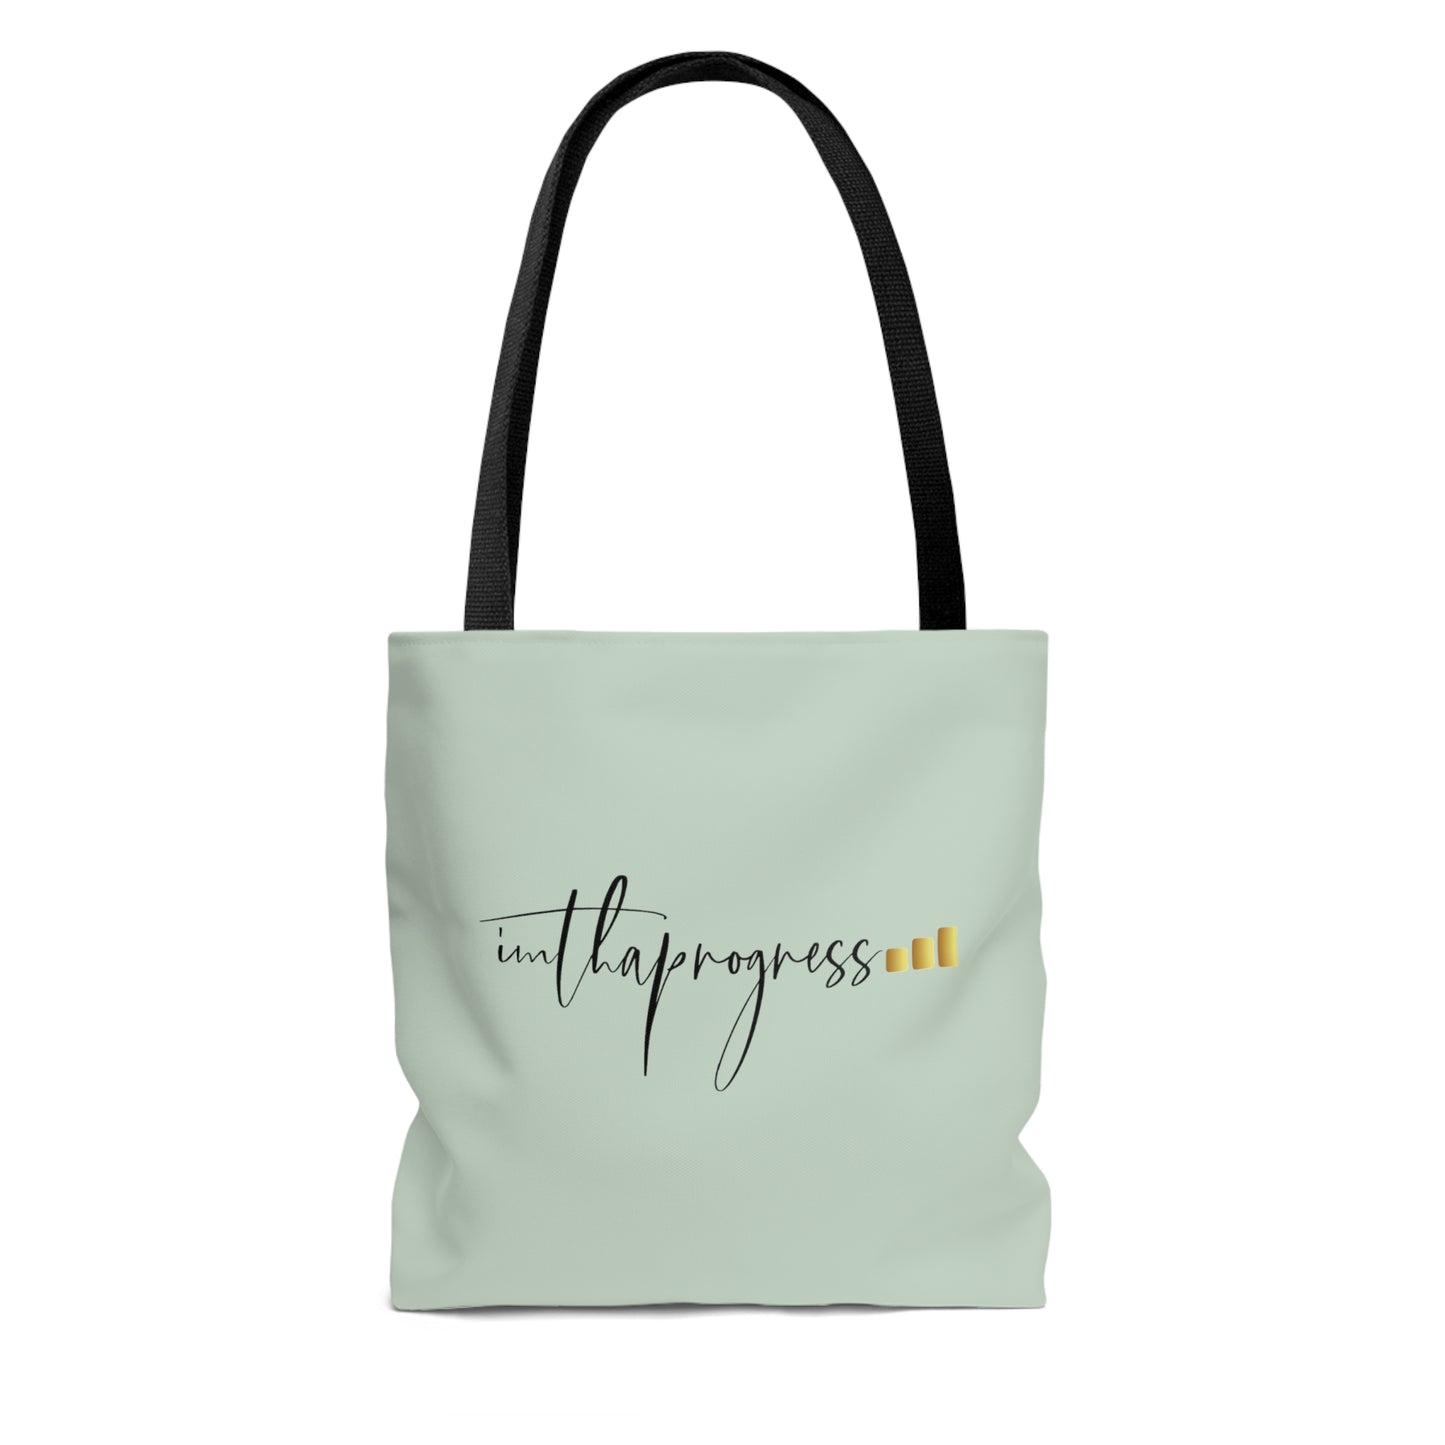 Tote Bag | Become Unstoppable